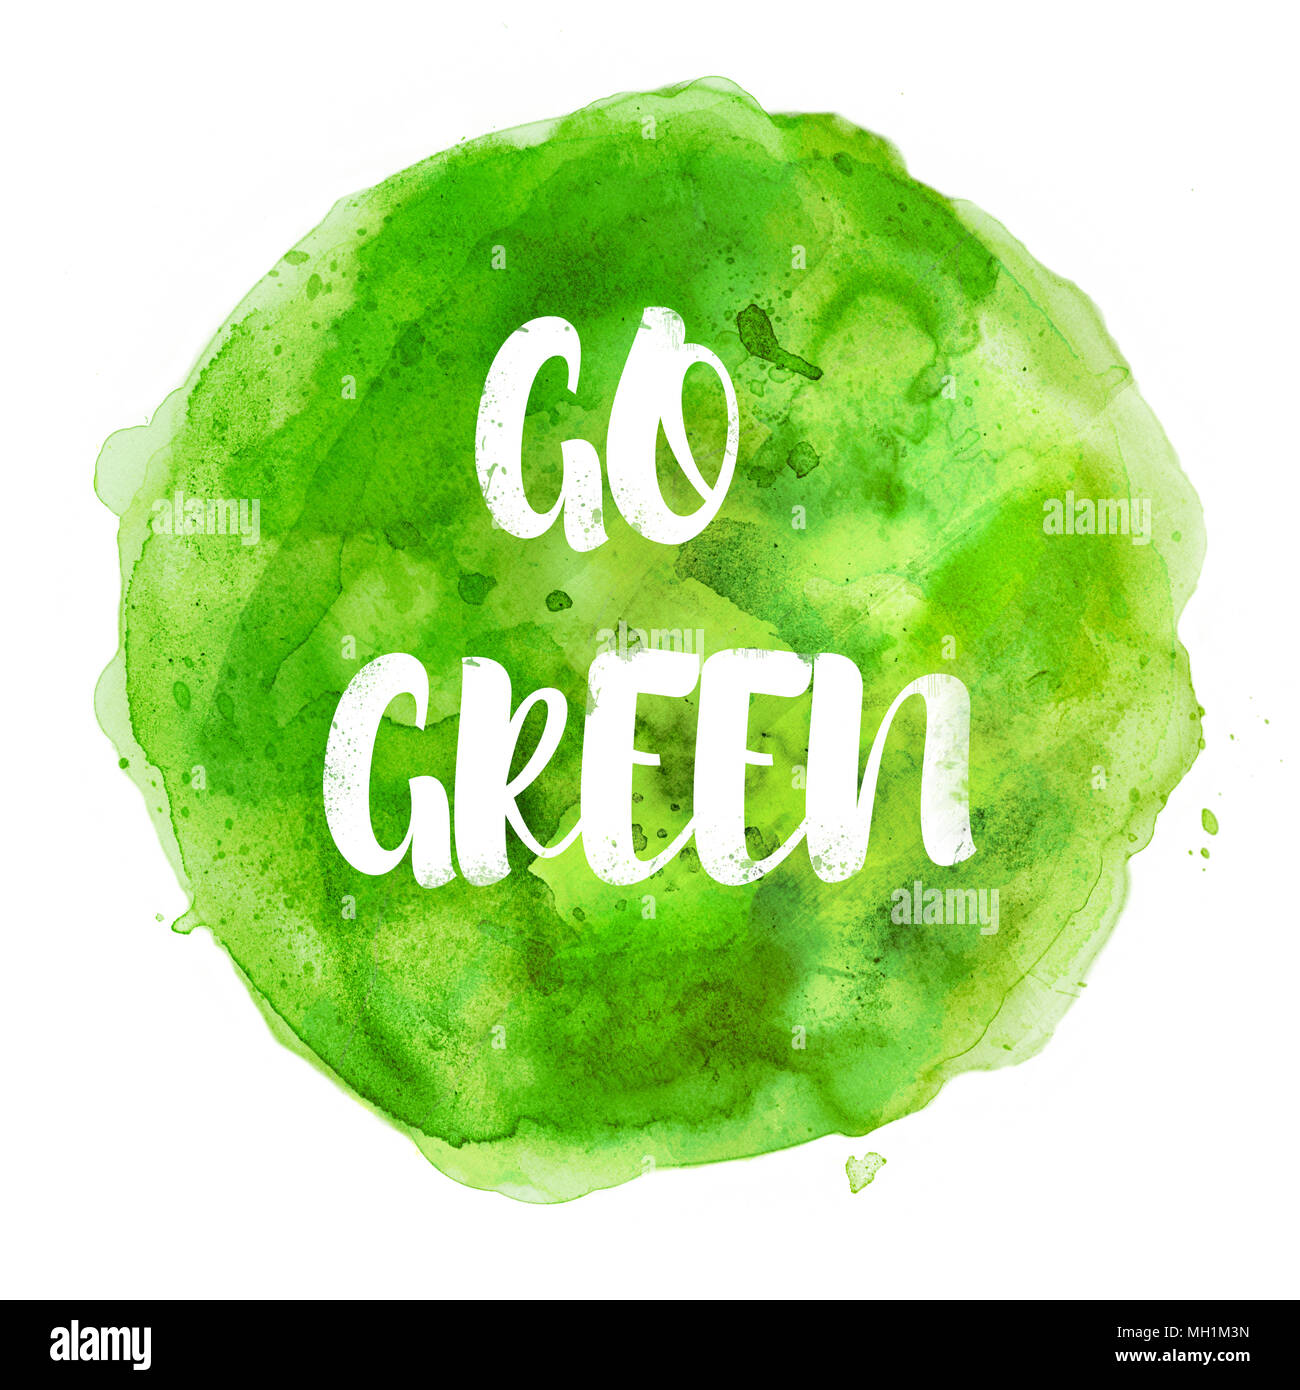 go green text on green watercolor blot Stock Photo